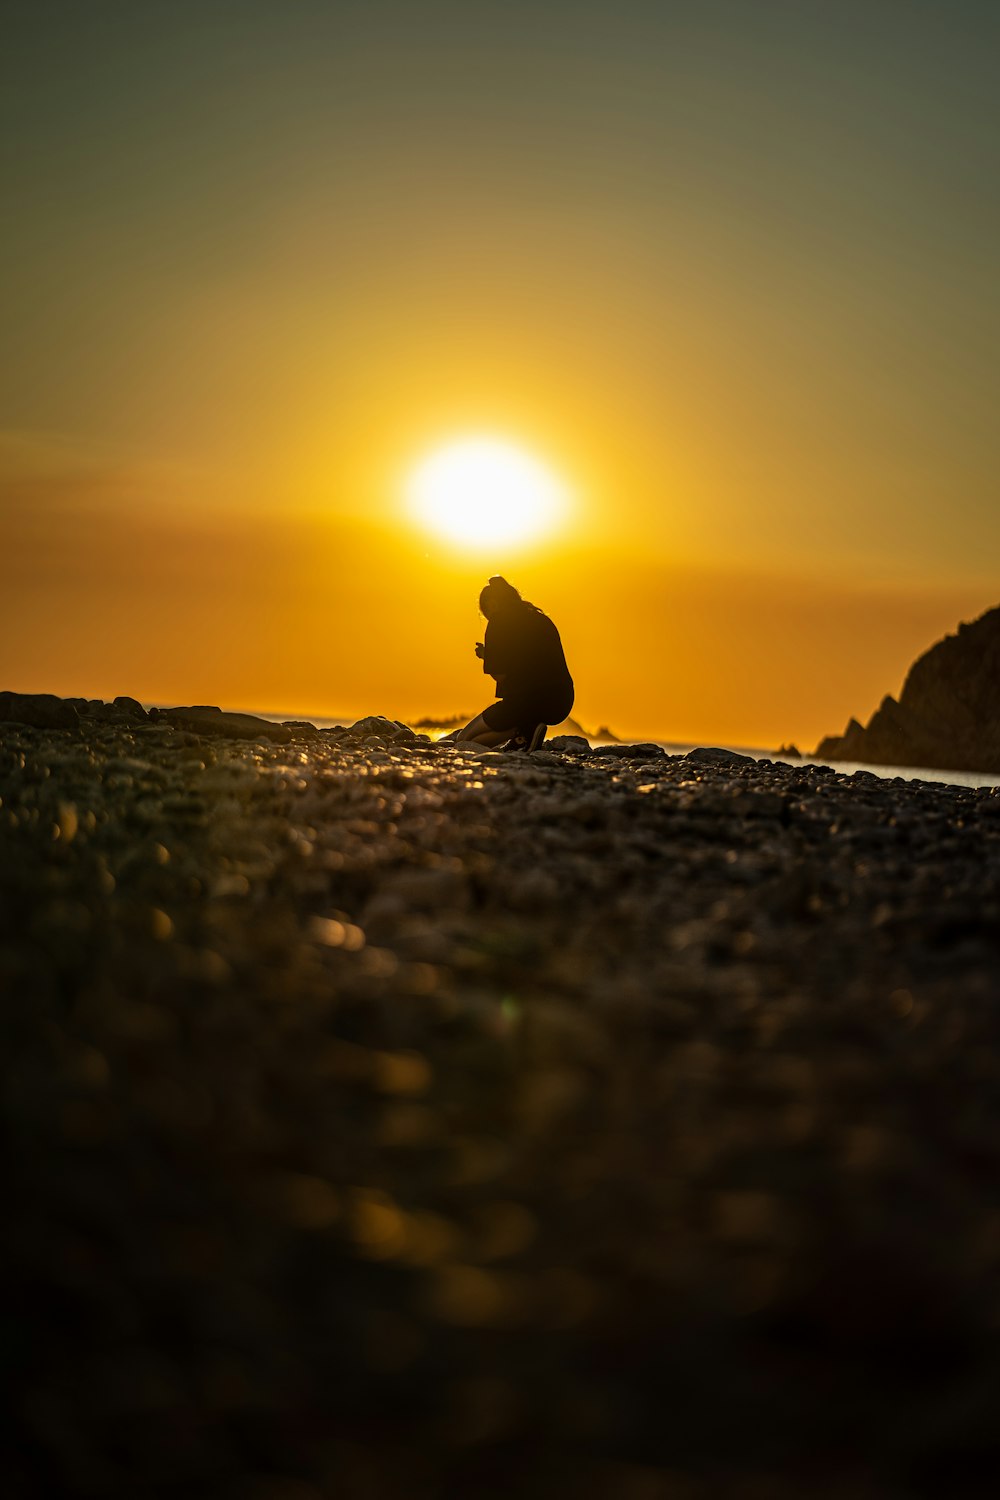 a silhouette of a person on a rocky beach with the sun setting